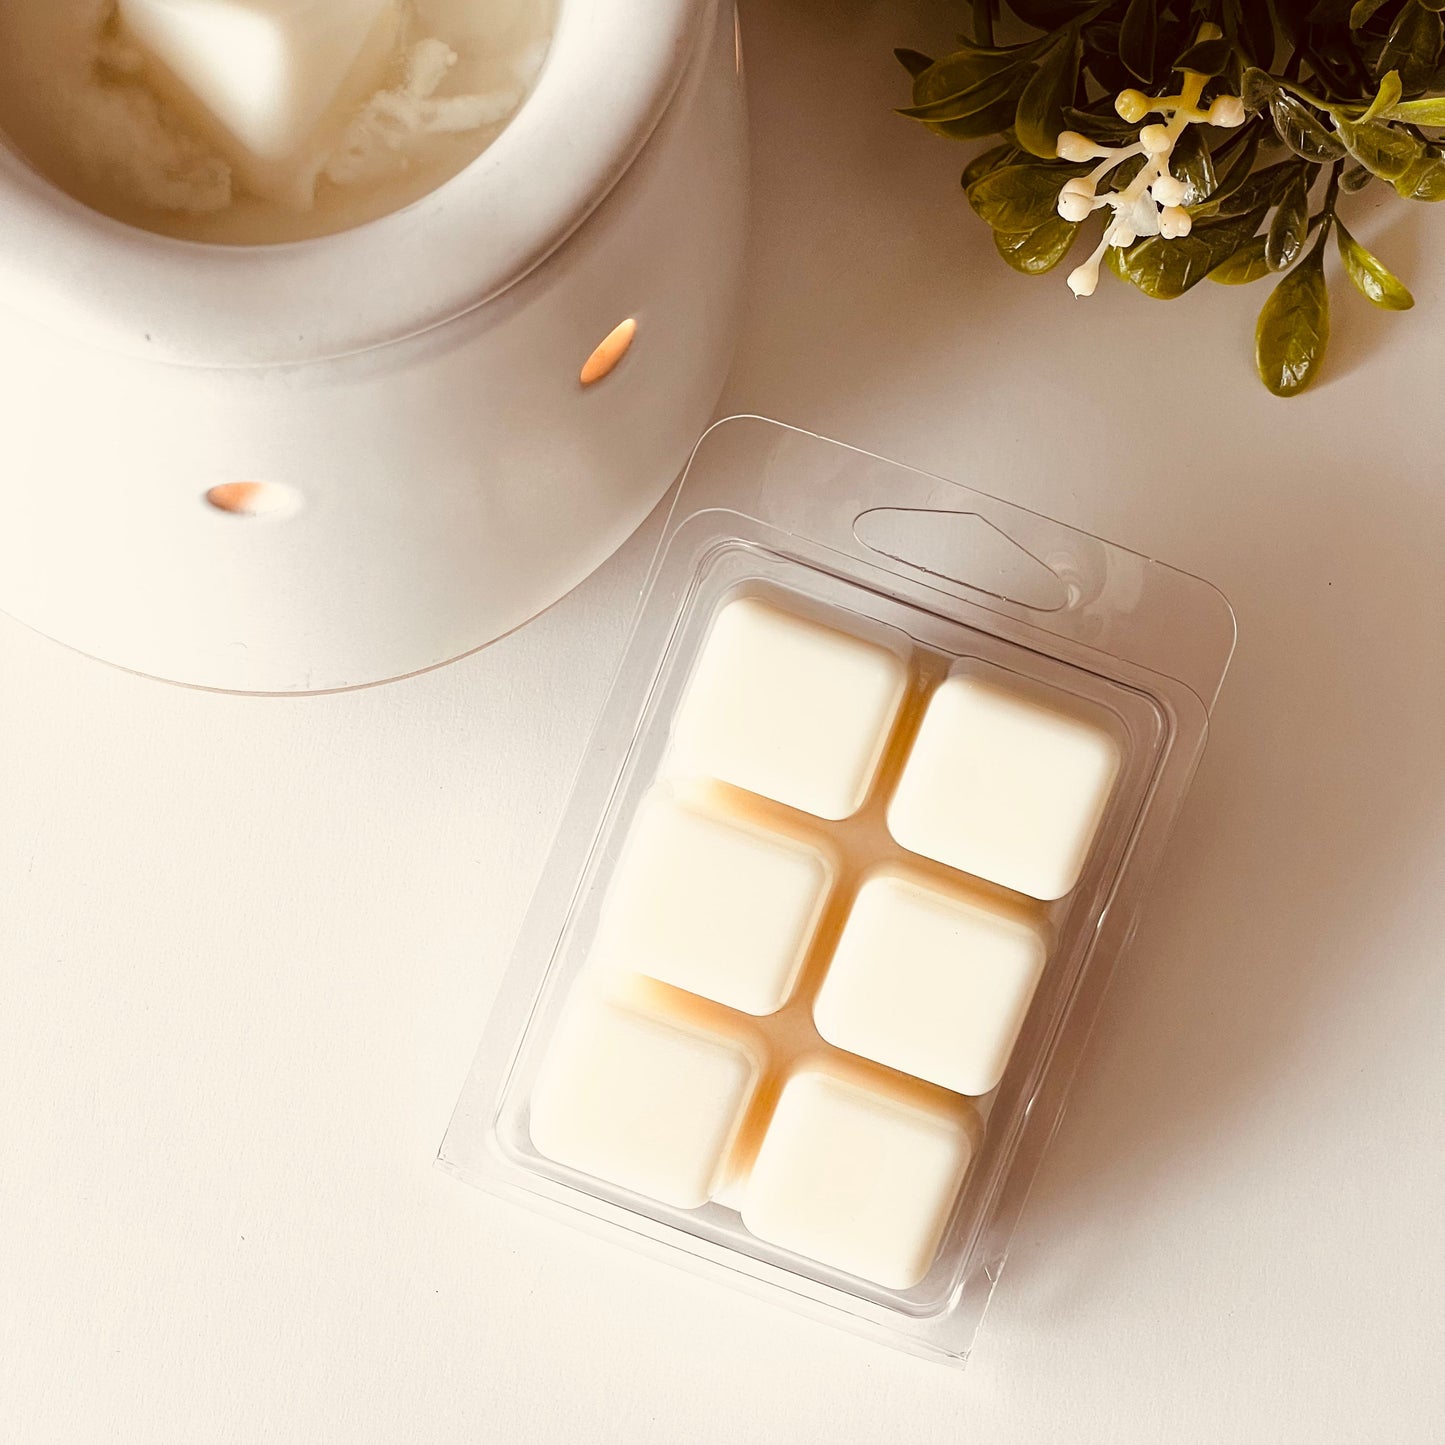 PERFECTLY IMPERFECT - 2.5 oz Soy Wax Melts